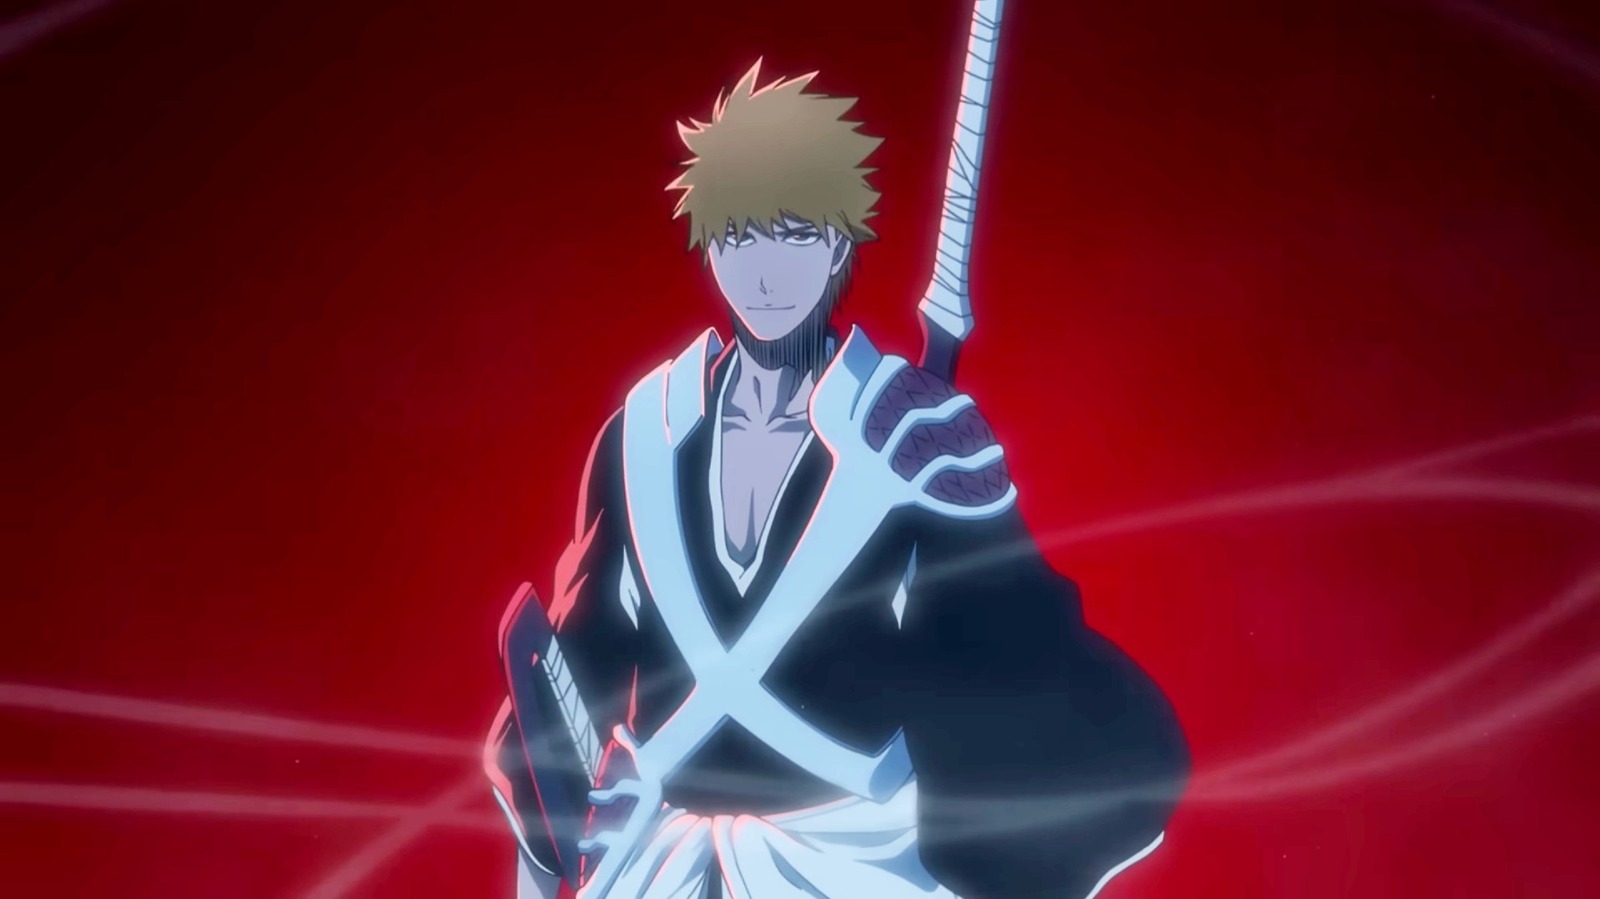 Bleach: Thousand Year Blood War to premiere on Hulu: release date